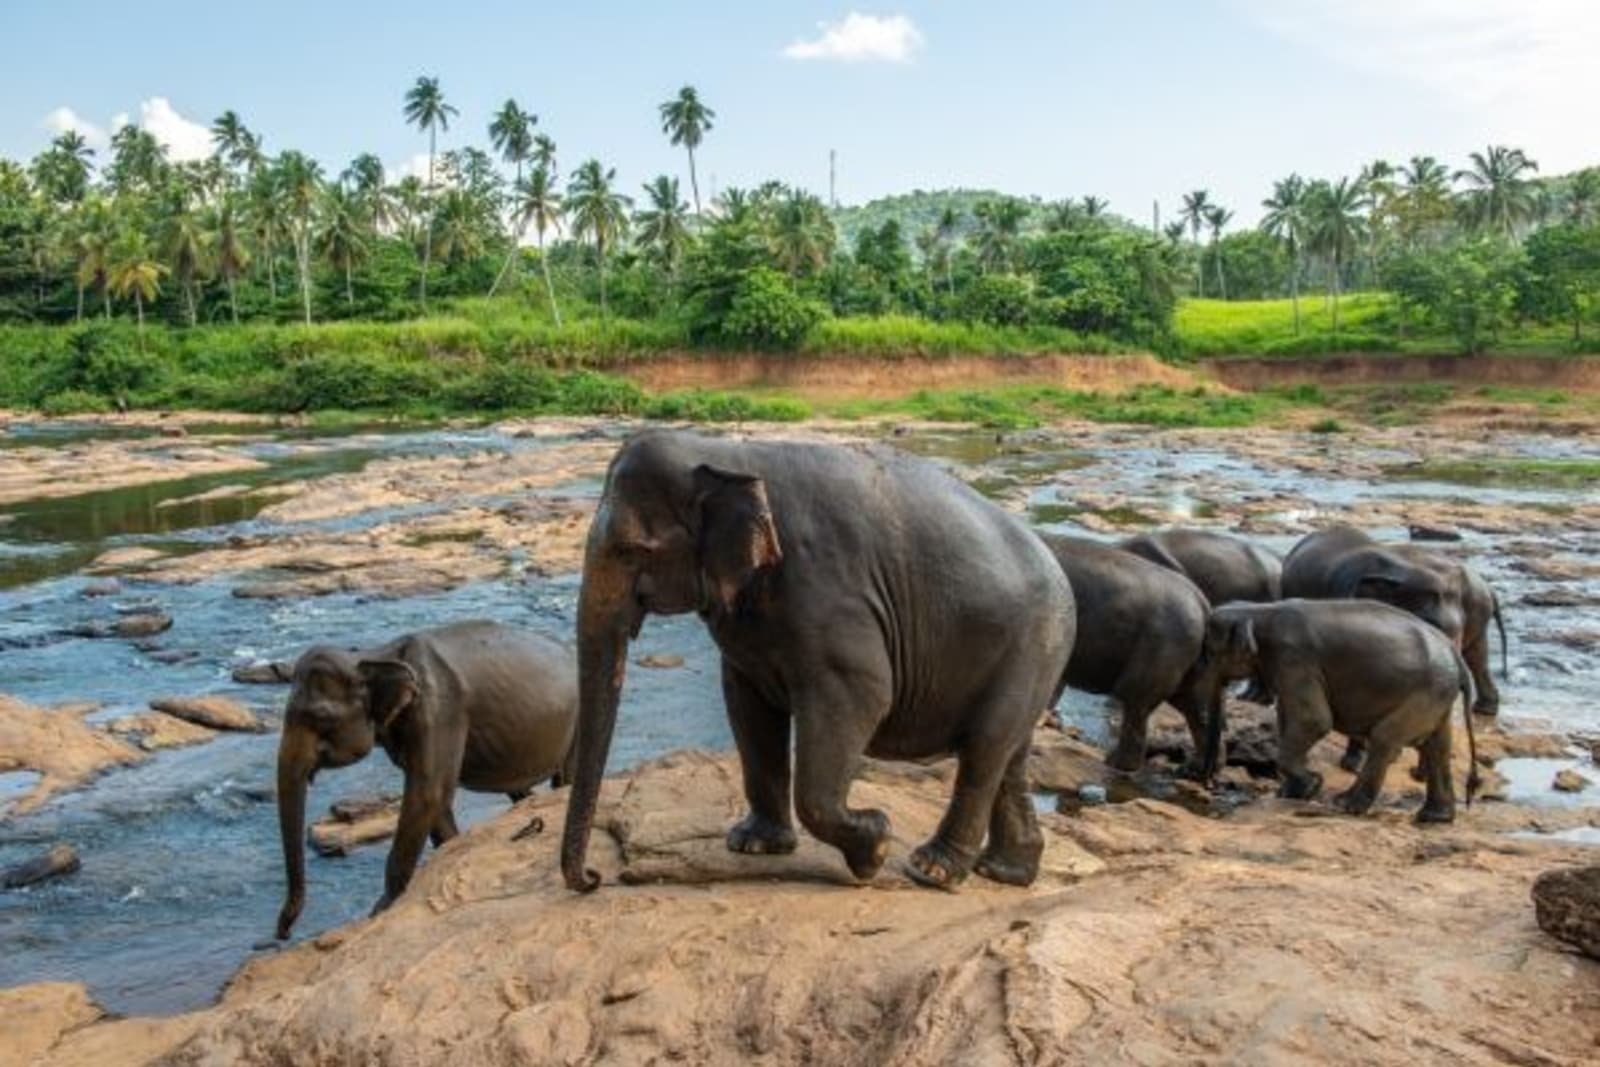 Group of elephants drinking water from a water hole